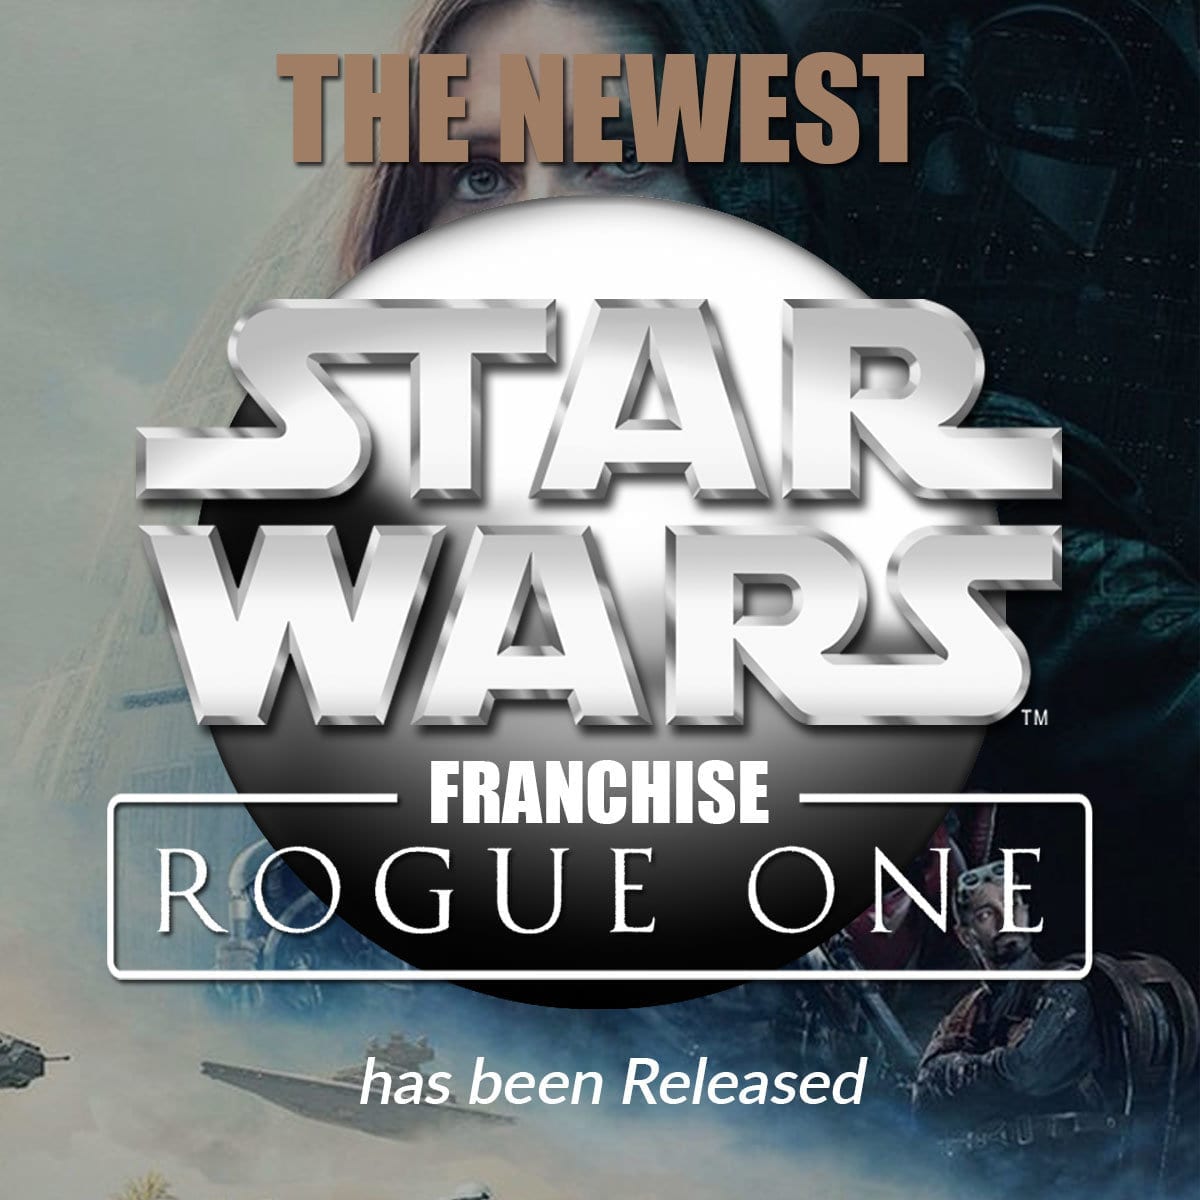 The Newest Star Wars Pinball Franchise, Rogue One has been Released